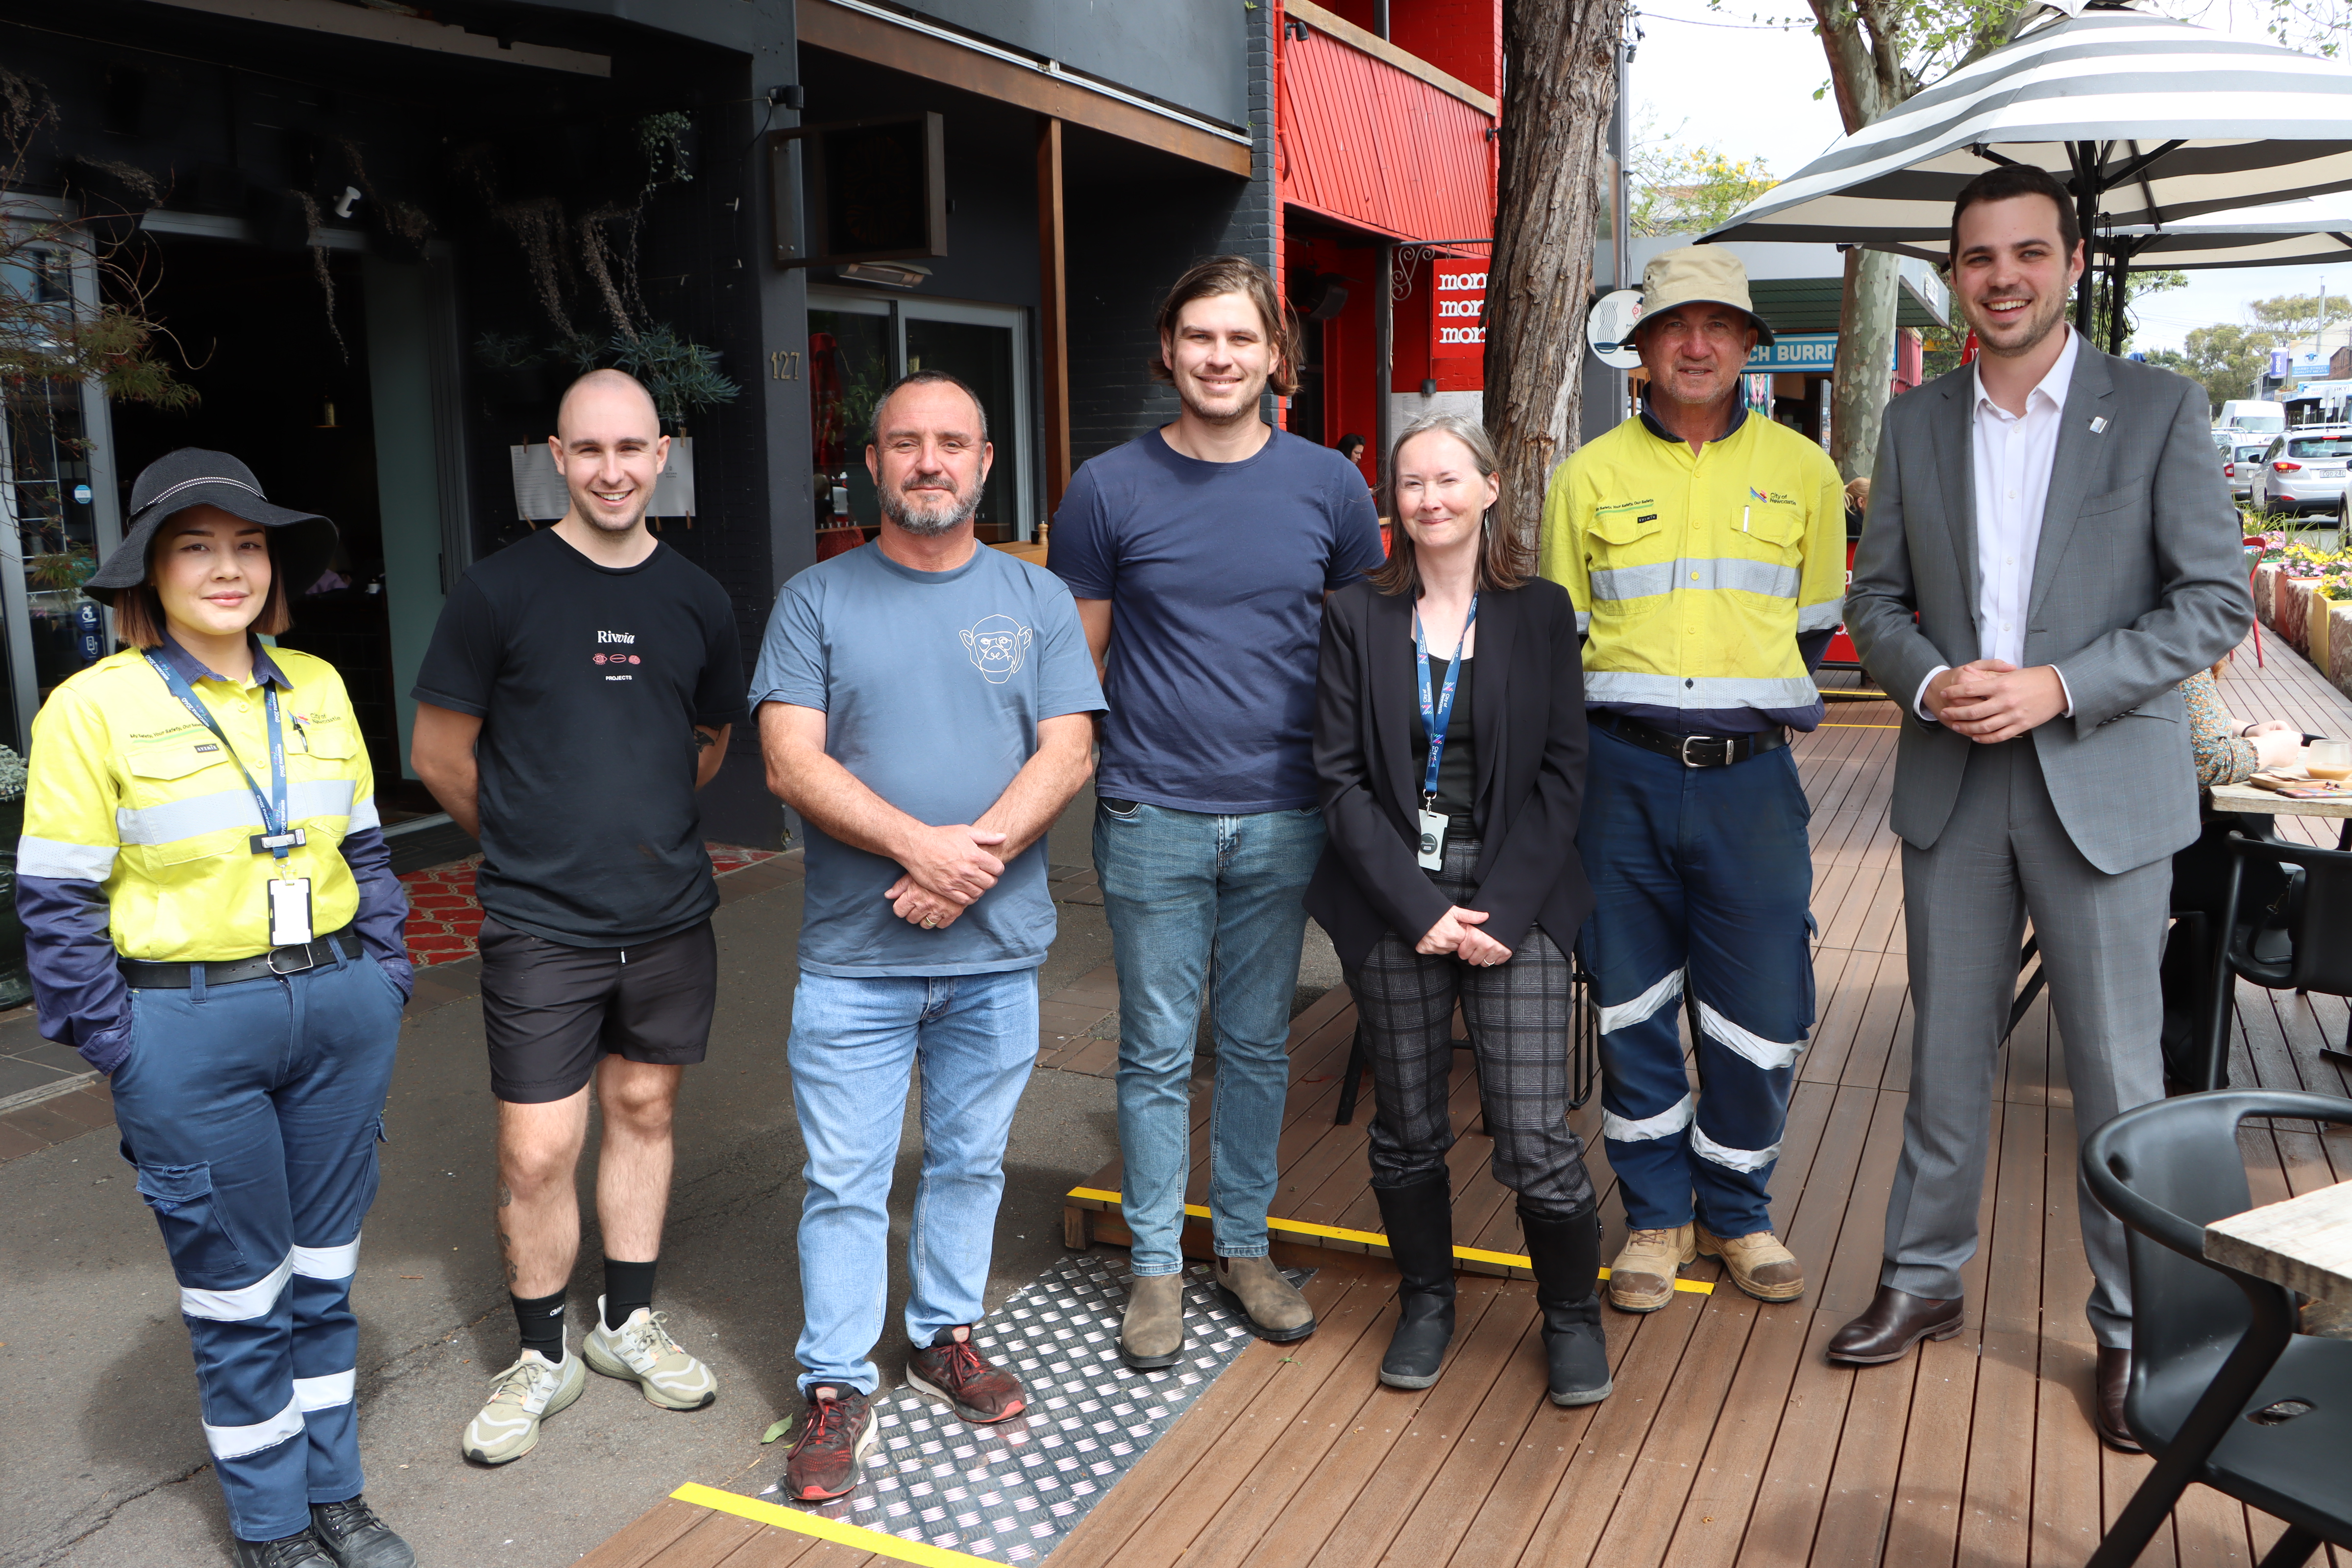 CN Project Manager Bianco Field-Vo, Autumn Rooms co-owner Taylor Schneider, Three Monkeys Café owner Anthony Strachan, CN Senior Civil Project Officer Clinton O'Meley, CN Senior Project Manager Sarah Horan, CN field worker Peter Moore, and Deputy Lord Mayor Declan Clausen